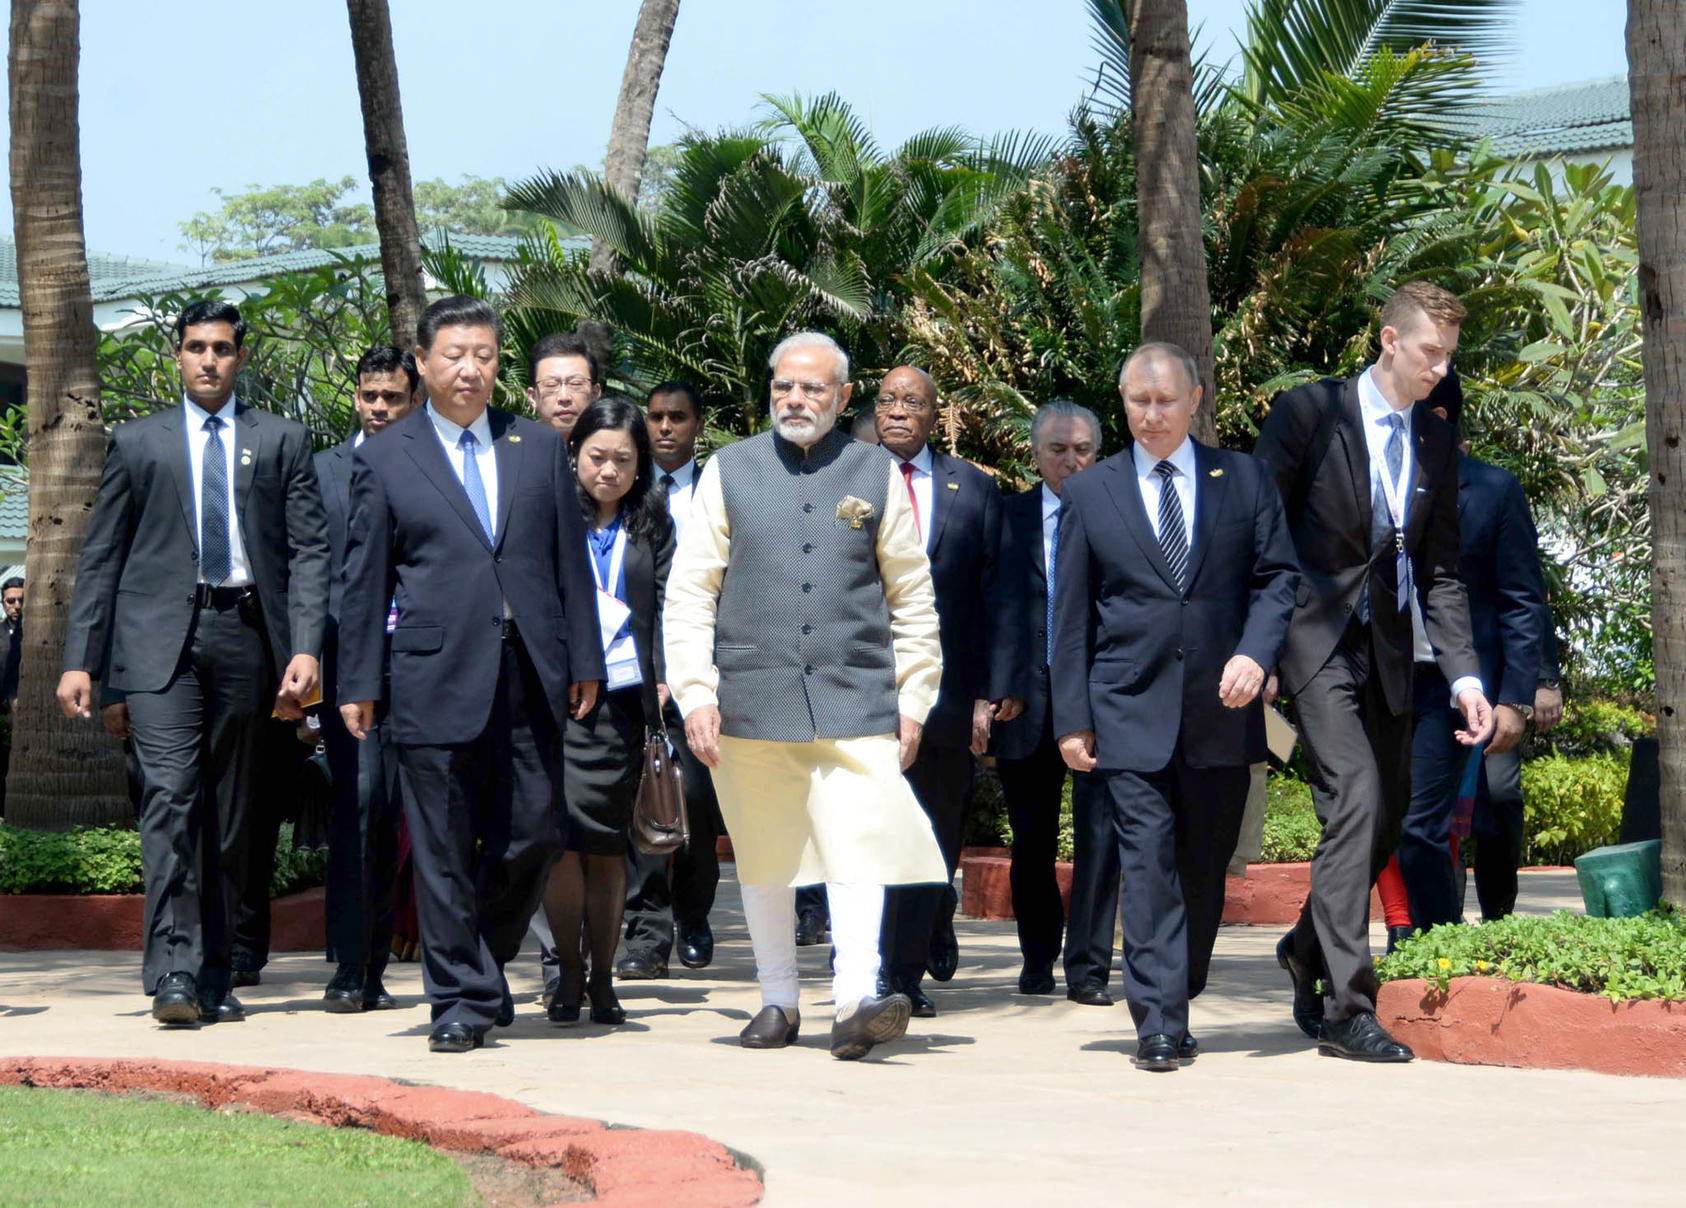 From left to right, Russian President Vladimir Putin, Indian Prime Minister Narendra Modi and Chinese President Xi Jinping, at the 2016 BRICS Summit-2016, in Goam India, October 16, 2016.